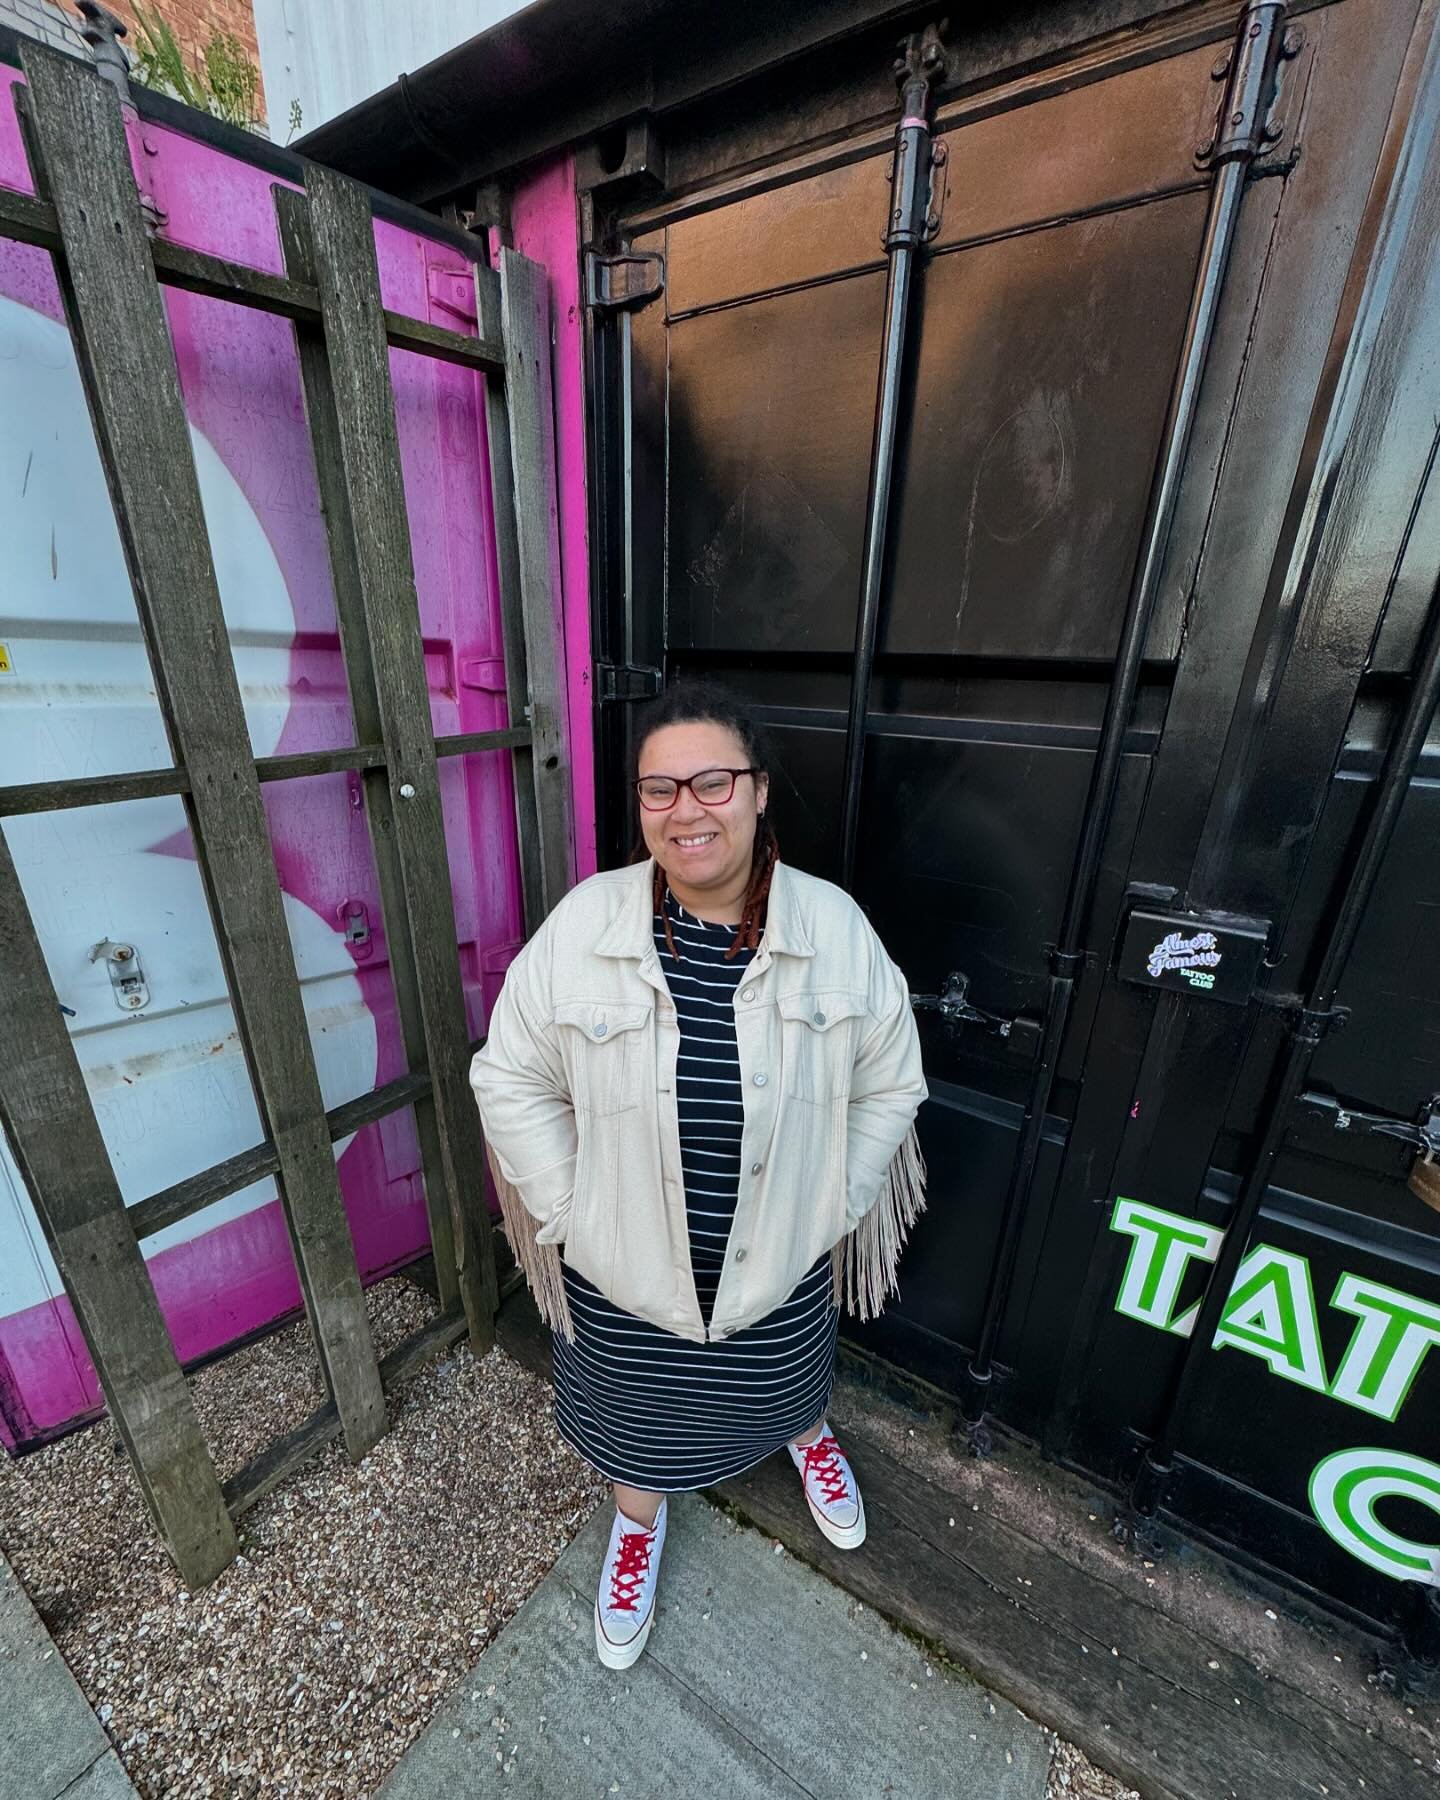 ON AIR NOW: WASAFIRI w/ @itsriziki 🔊 Bringing you GENGETONE, BONGO FLAVA &amp; AFROBEAT Til 9PM 🔊 Featuring tracks from @vinkaofficial @matataofficial &amp; @officialnandy 🔒 Keep it locked at 105.5FM - PLATFORM.ORG.UK - DAB 🔒